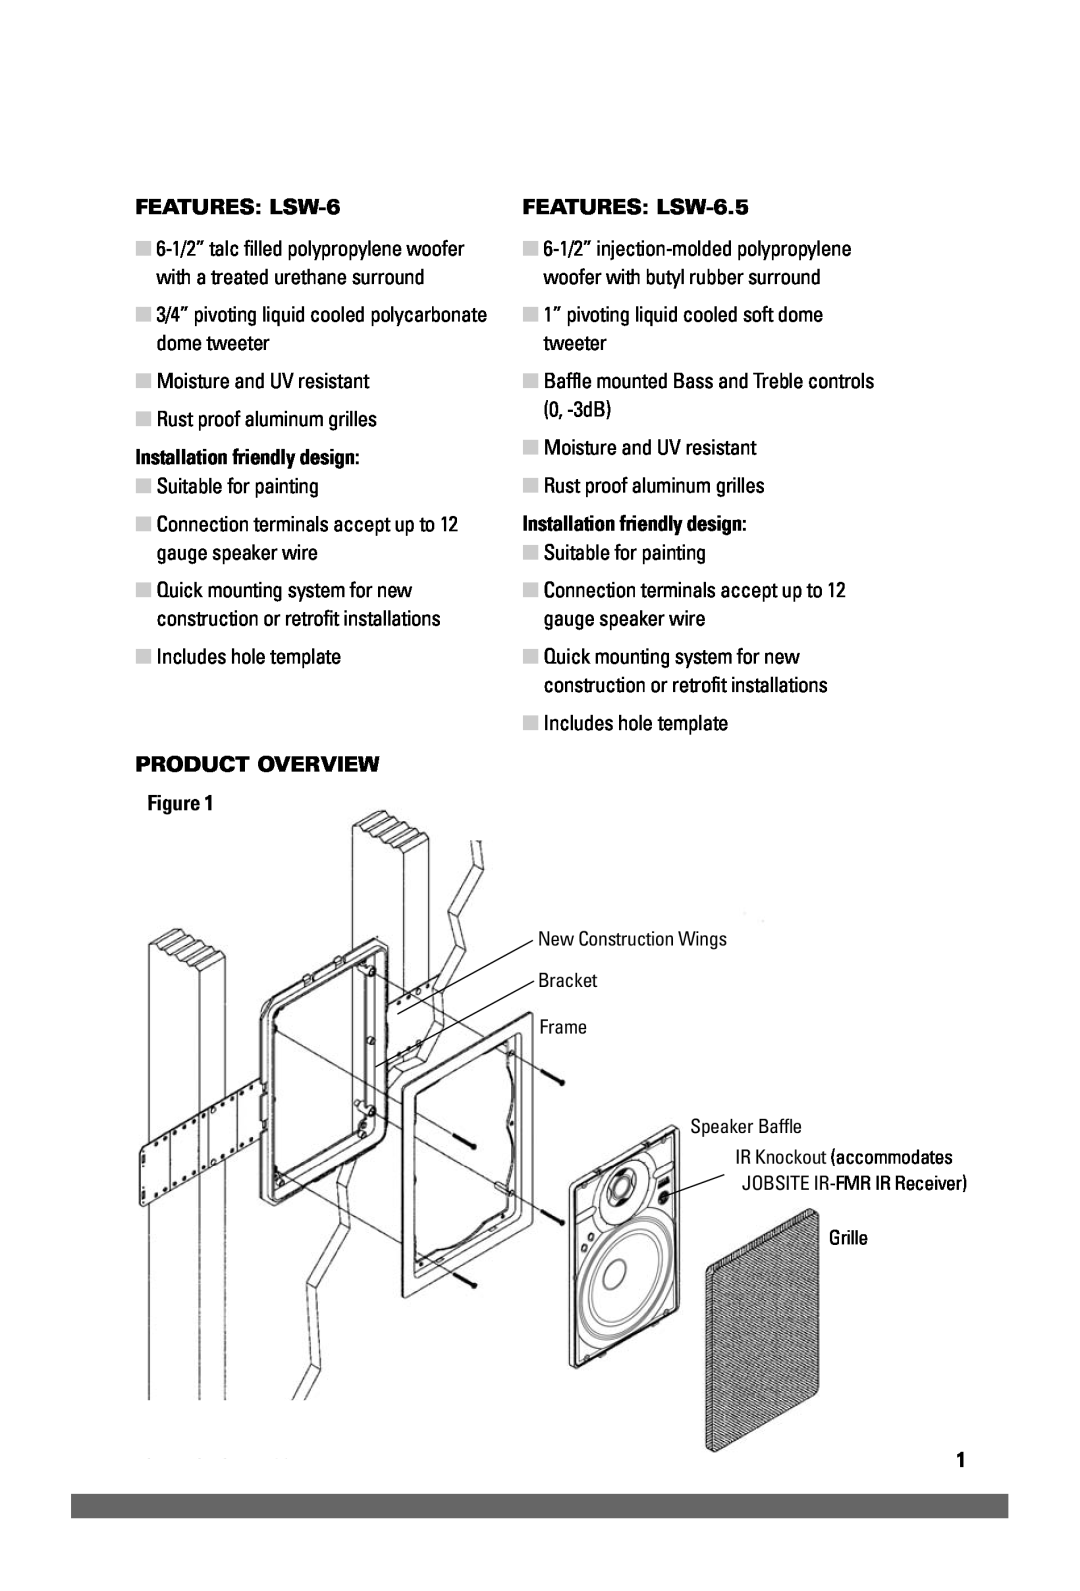 JobSite Systems manual Installation friendly design, FEATURES LSW-6.5, PRODUCT OVERVIEW Figure 